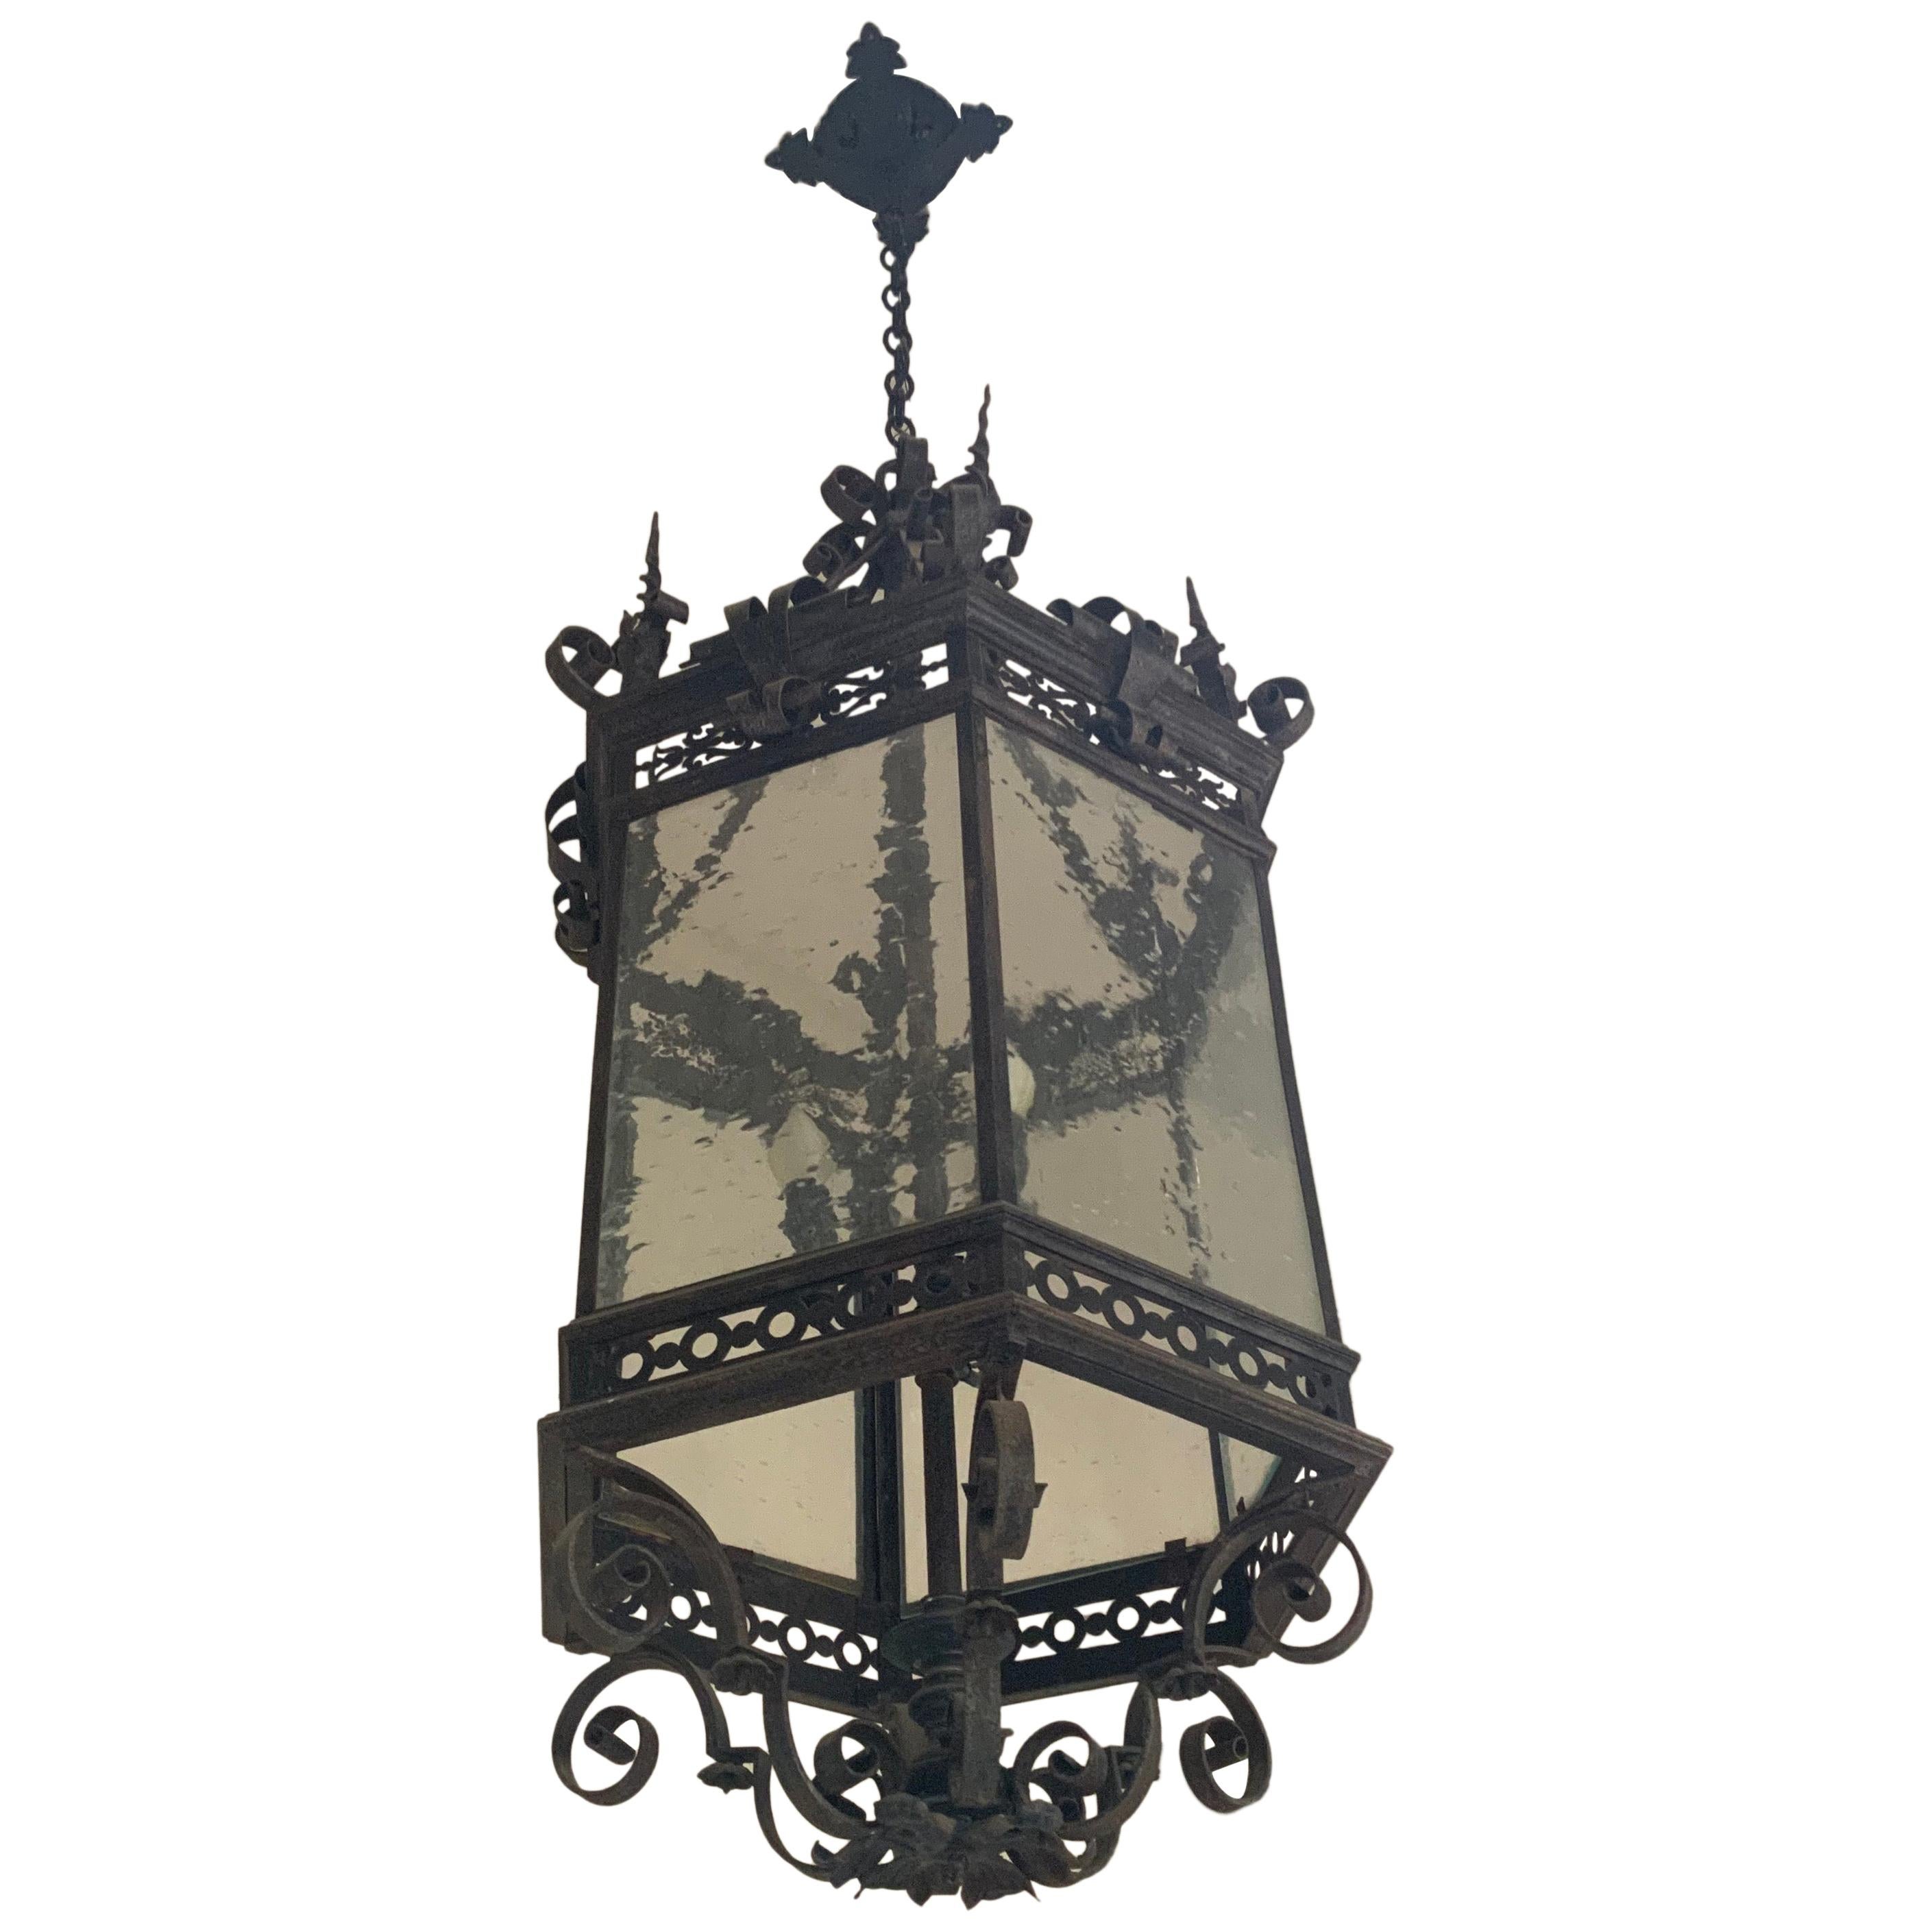 19th Century Bronze Chateau Lantern from France